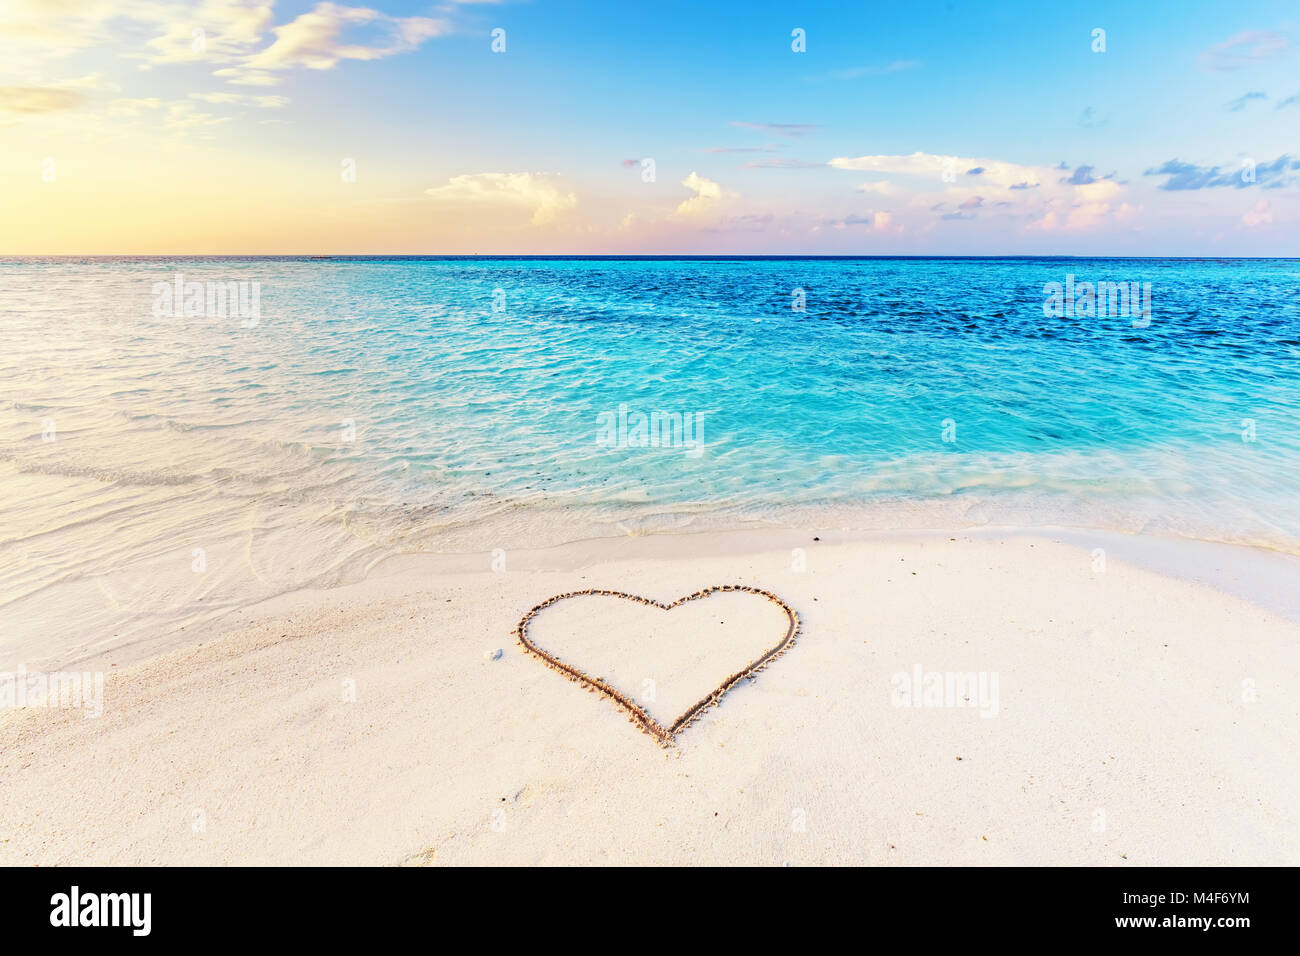 Heart drawn on sand of a tropical beach at sunset. Stock Photo